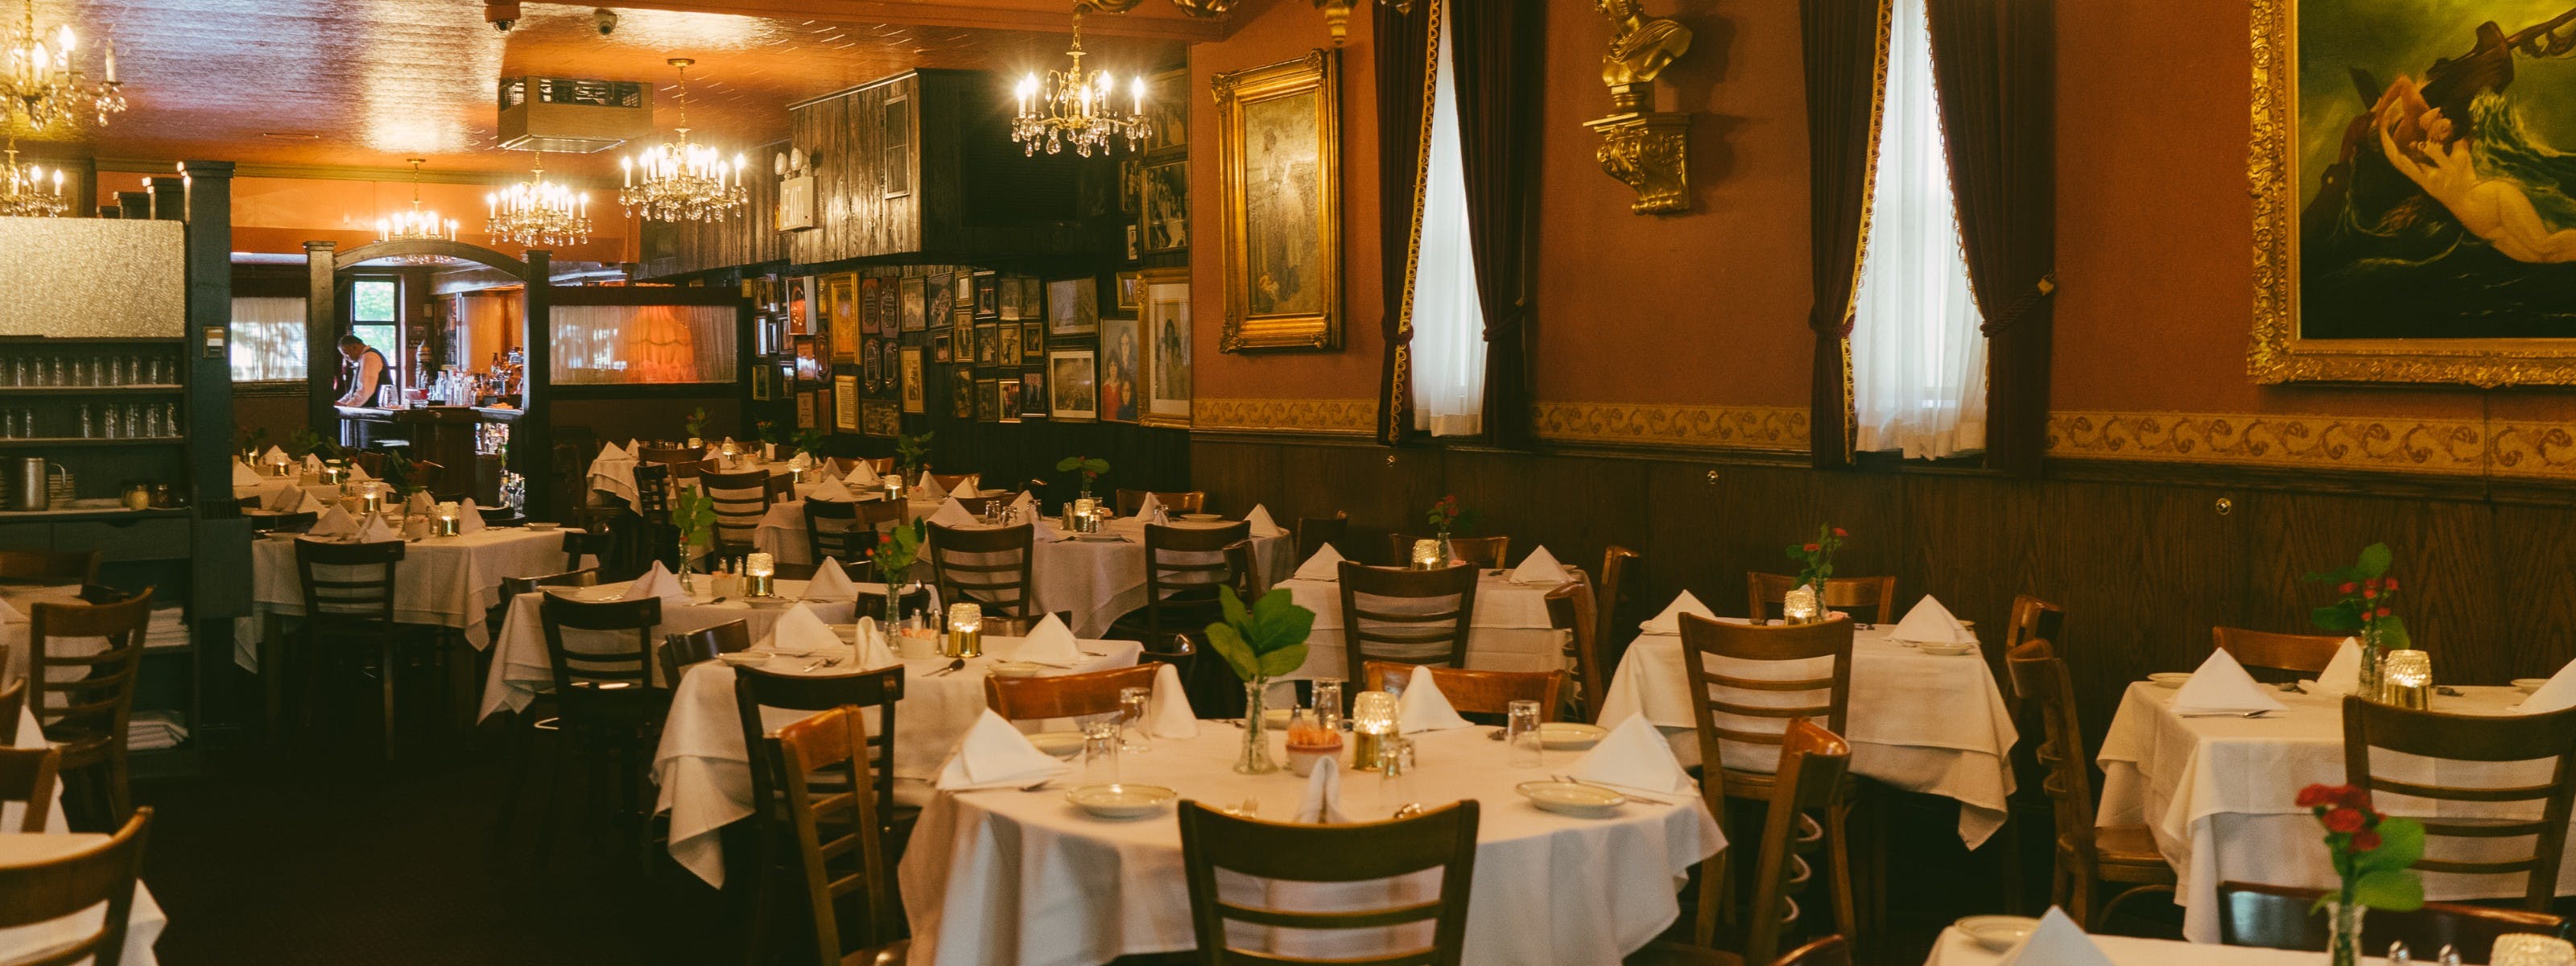 Carbone Review - Greenwich Village - New York - The Infatuation